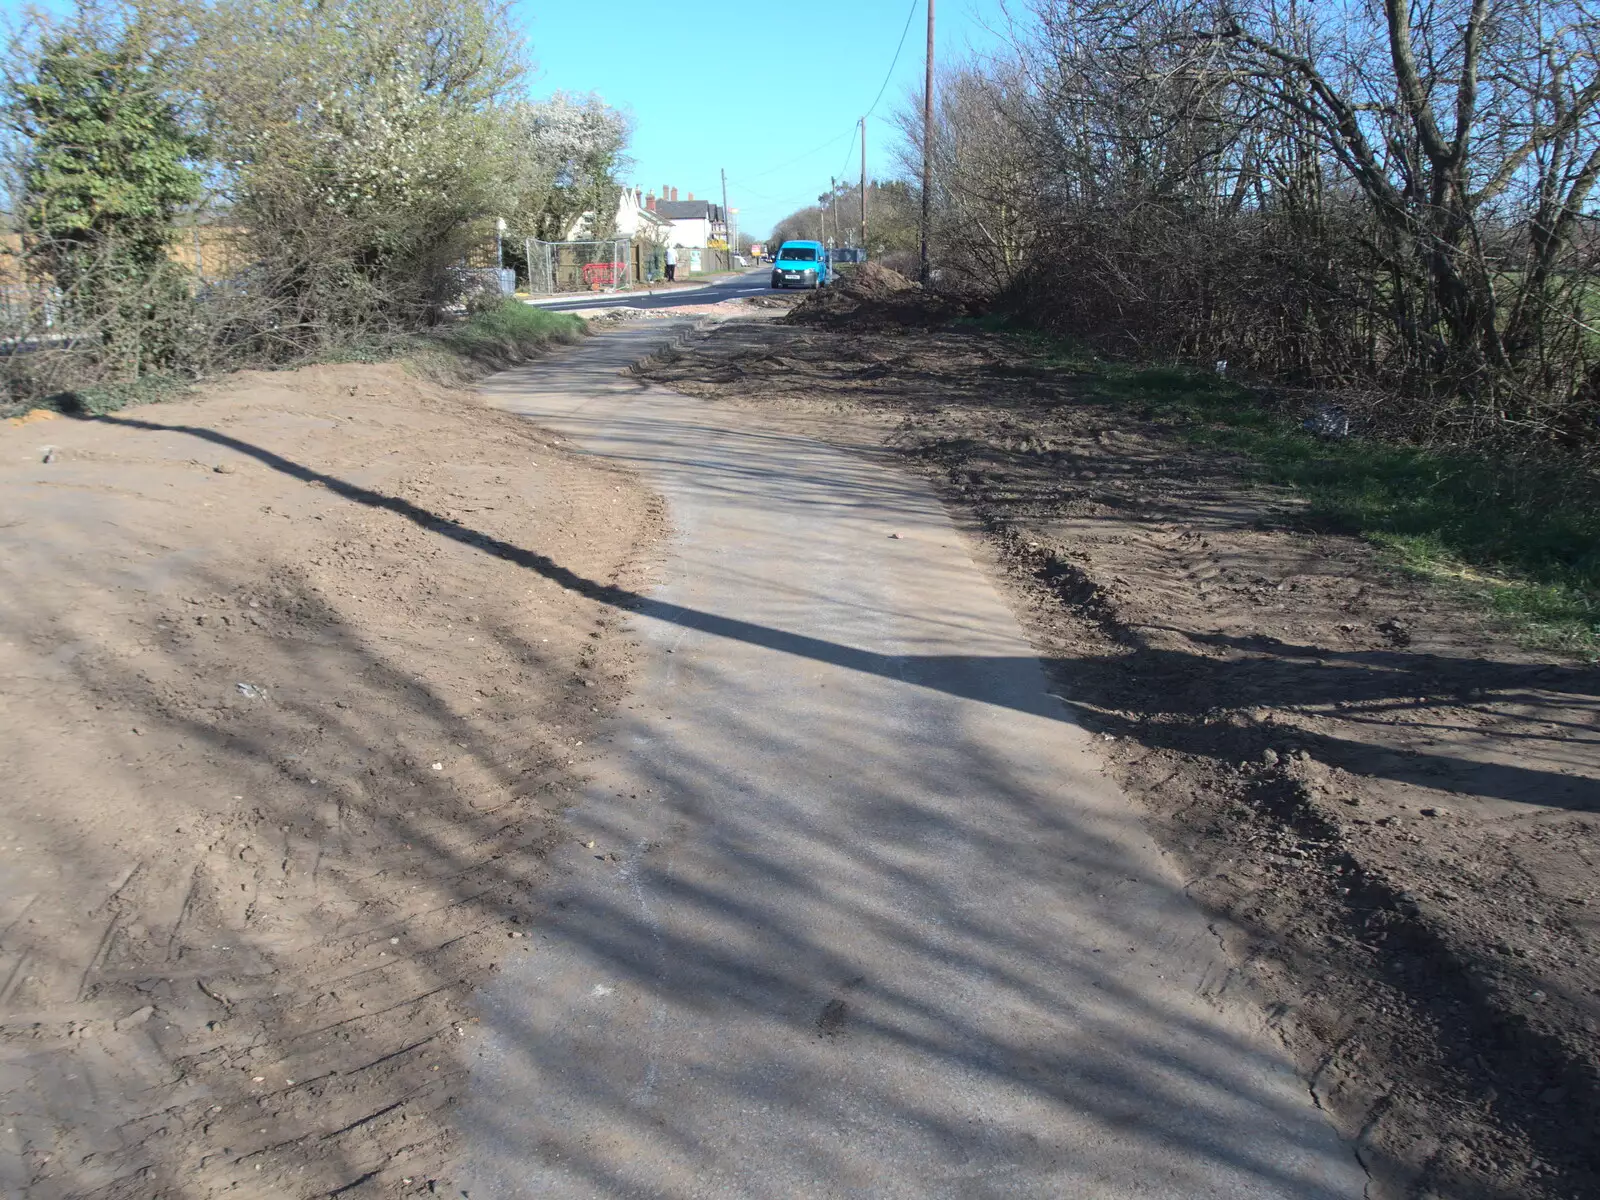 An old bit of B1077 is now a cycle path, from Roadworks and Harry's Trampoline, Brome, Suffolk - 6th April 2021